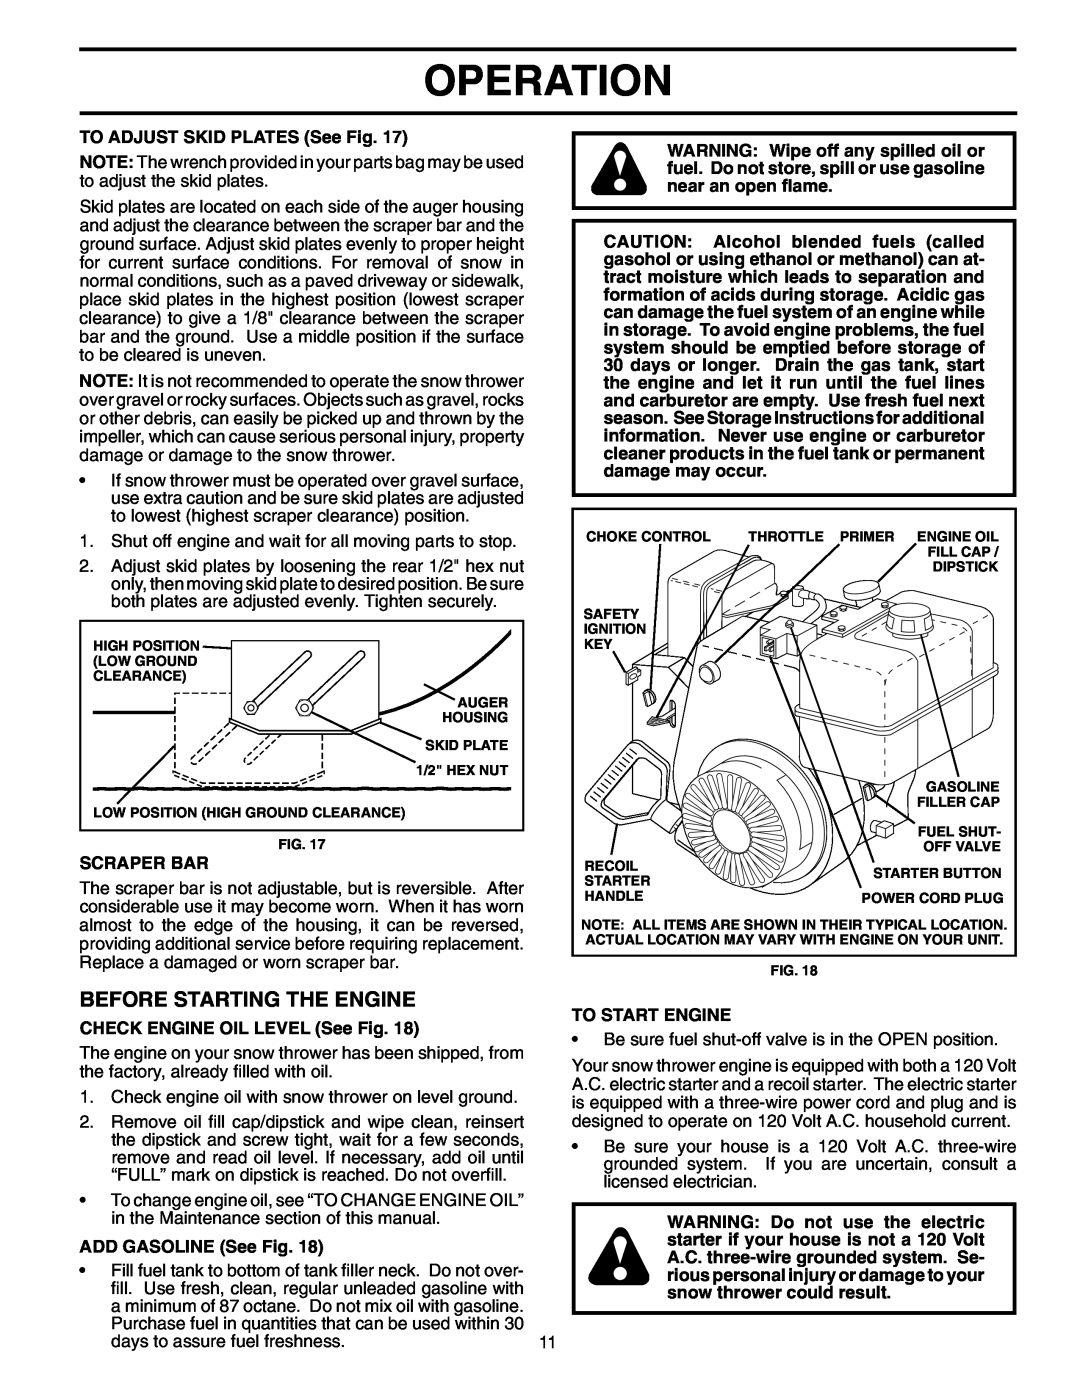 Poulan 401214 Before Starting The Engine, Operation, TO ADJUST SKID PLATES See Fig, Scraper Bar, ADD GASOLINE See Fig 